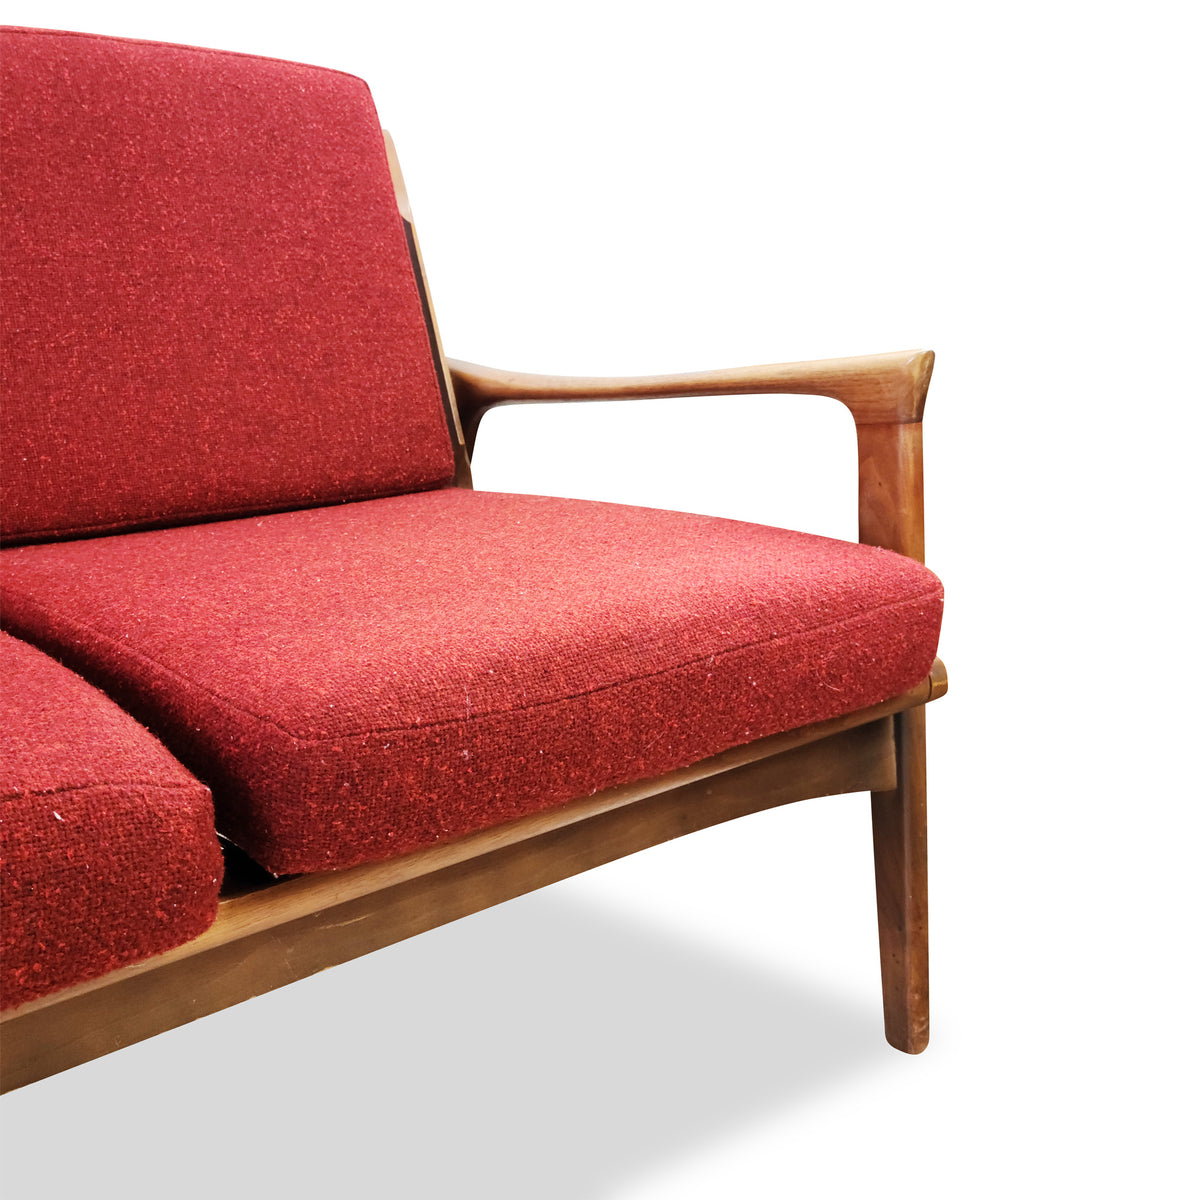 Vintage Walnut Four Seat Sofa by Paramount of Montreal